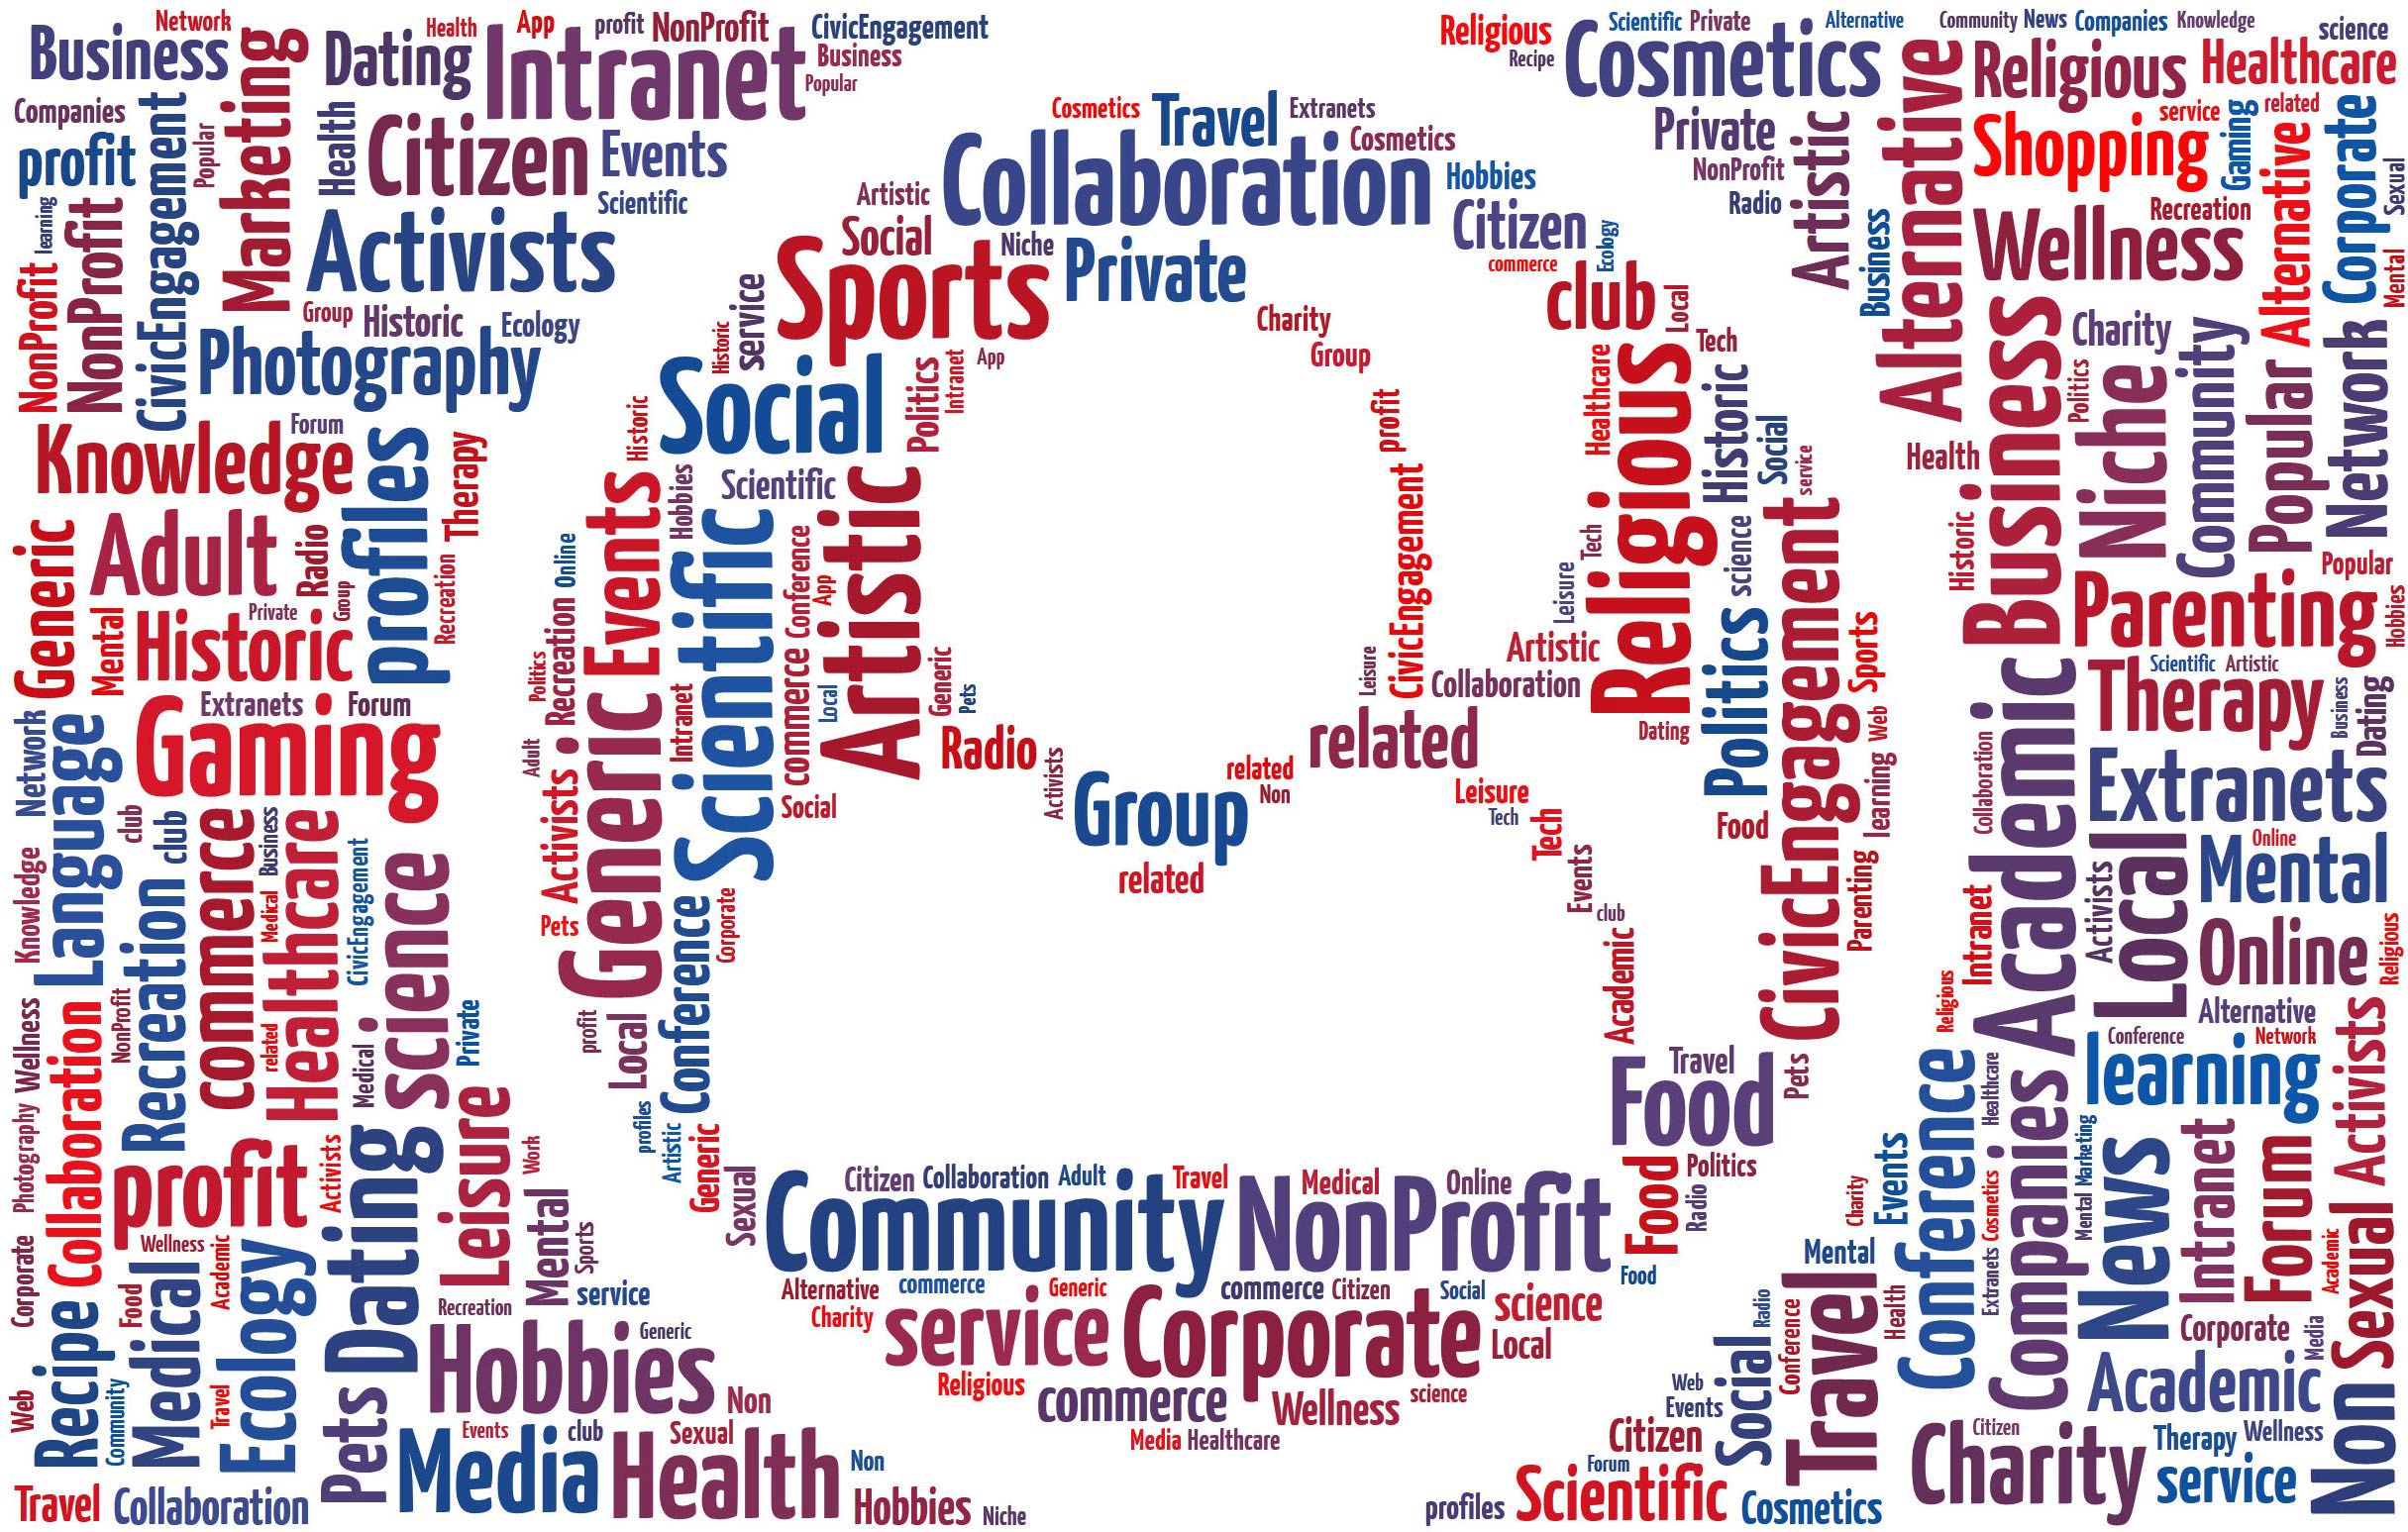 Tag Cloud of Types of BuddyPress Sites listed below